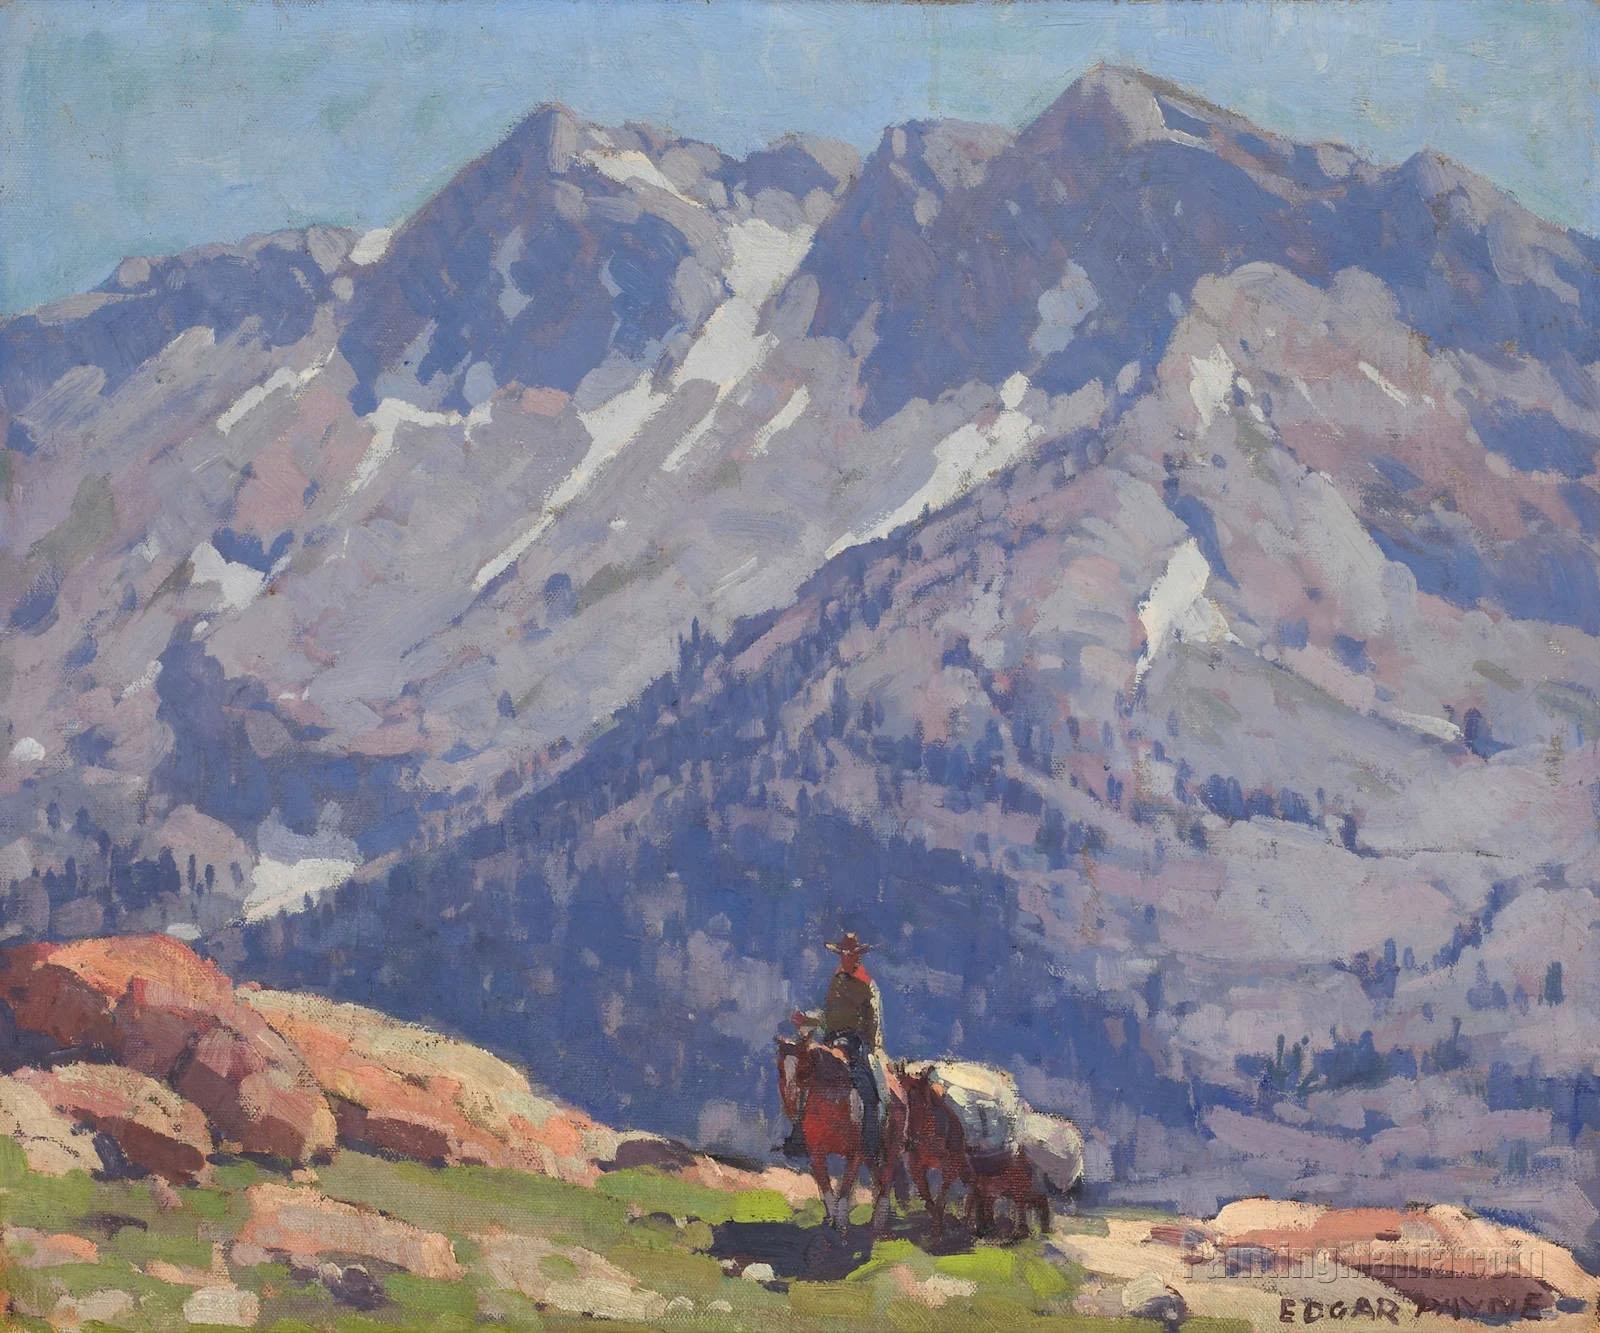 A Rider with Packhorses in the Sierras,